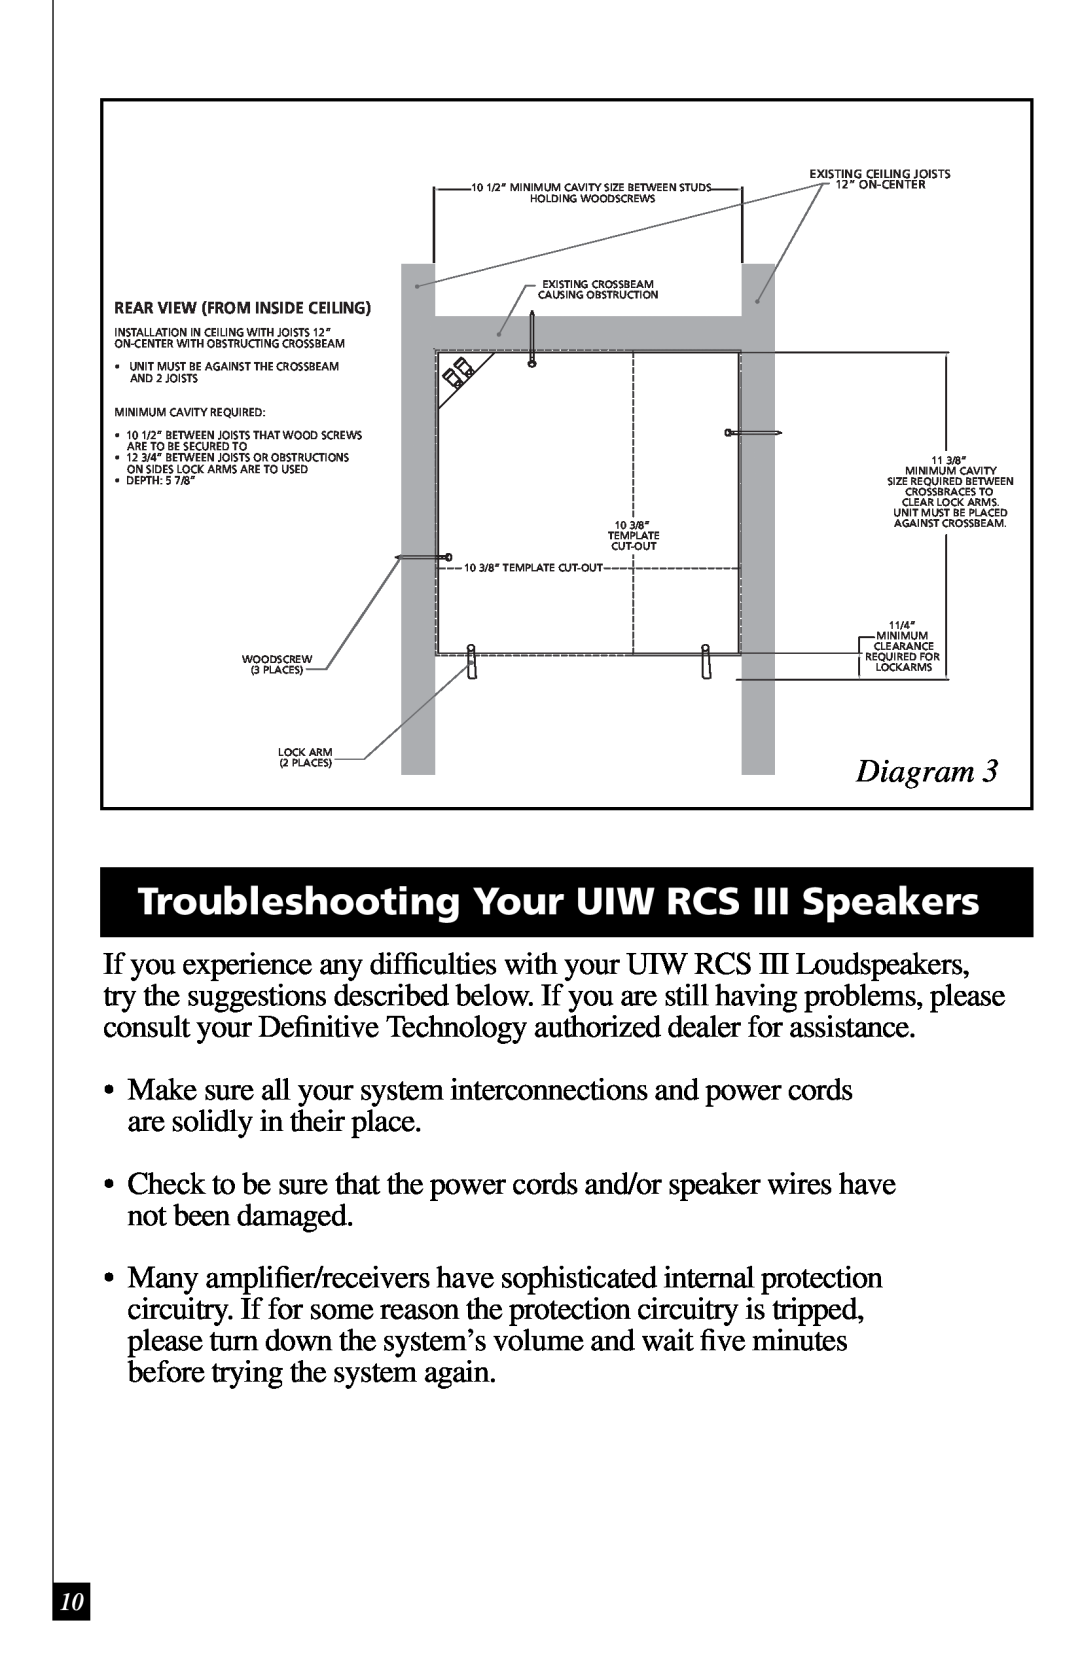 Definitive Technology Troubleshooting Your UIW RCS III Speakers, Diagram, Existing Ceiling Joists, DEPTH 5 7/8” 